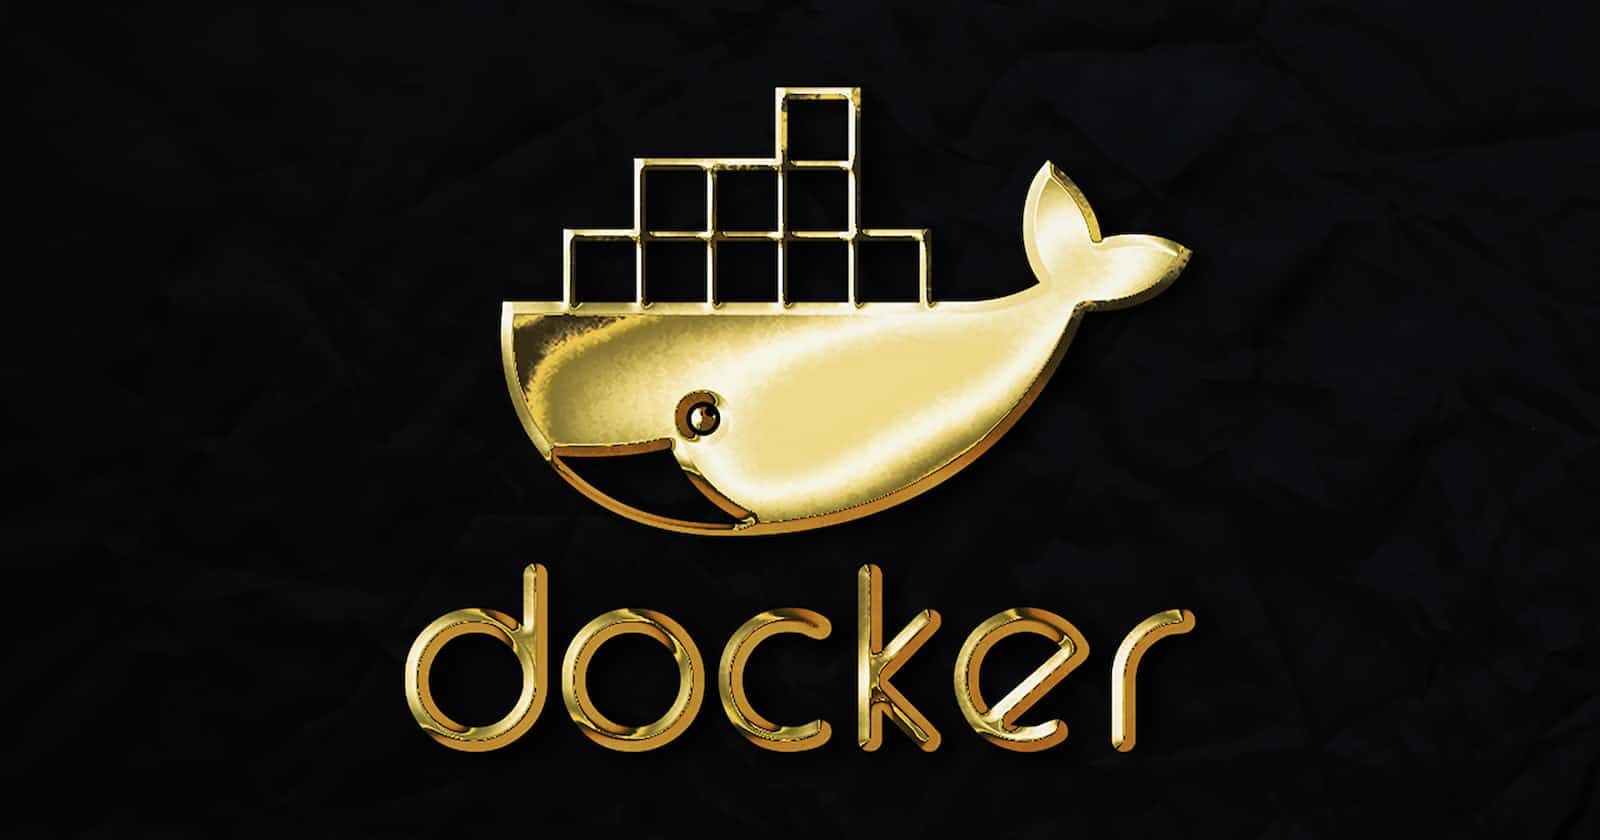 How to install Docker on Deepin OS 20.7 or any other Debian-based Linux distribution via the terminal emulator?